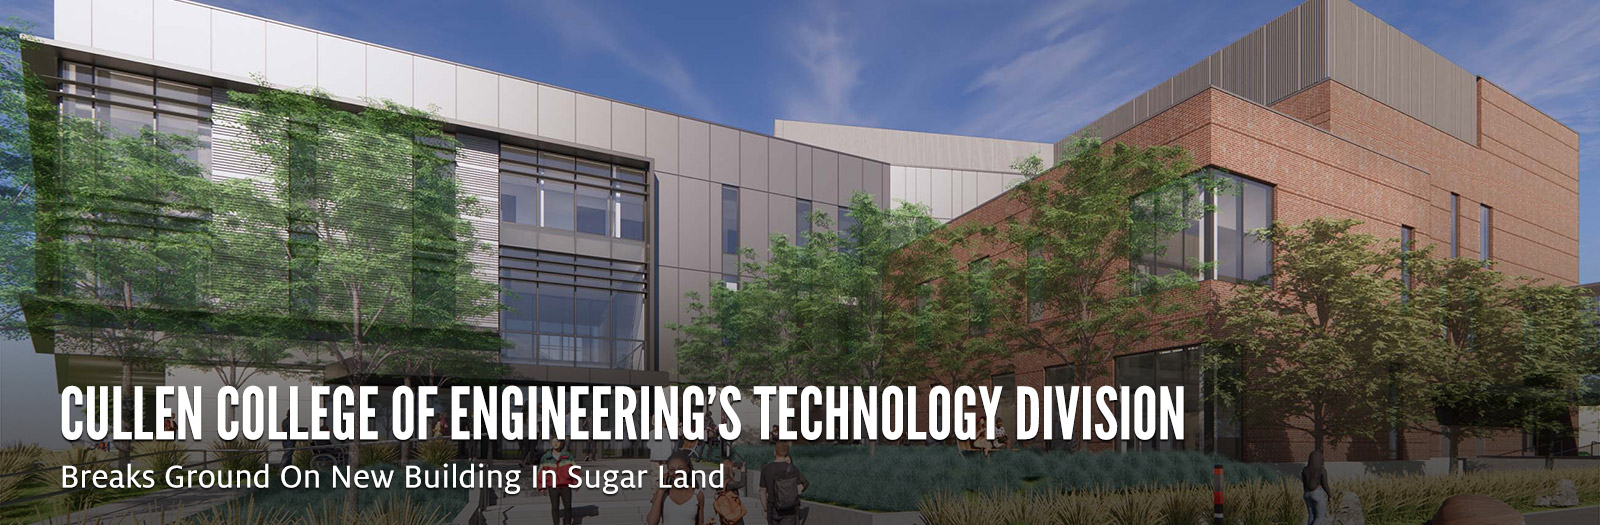 Cullen College of Engineering's Technology Division Breaks Ground On New Building In Sugar Land